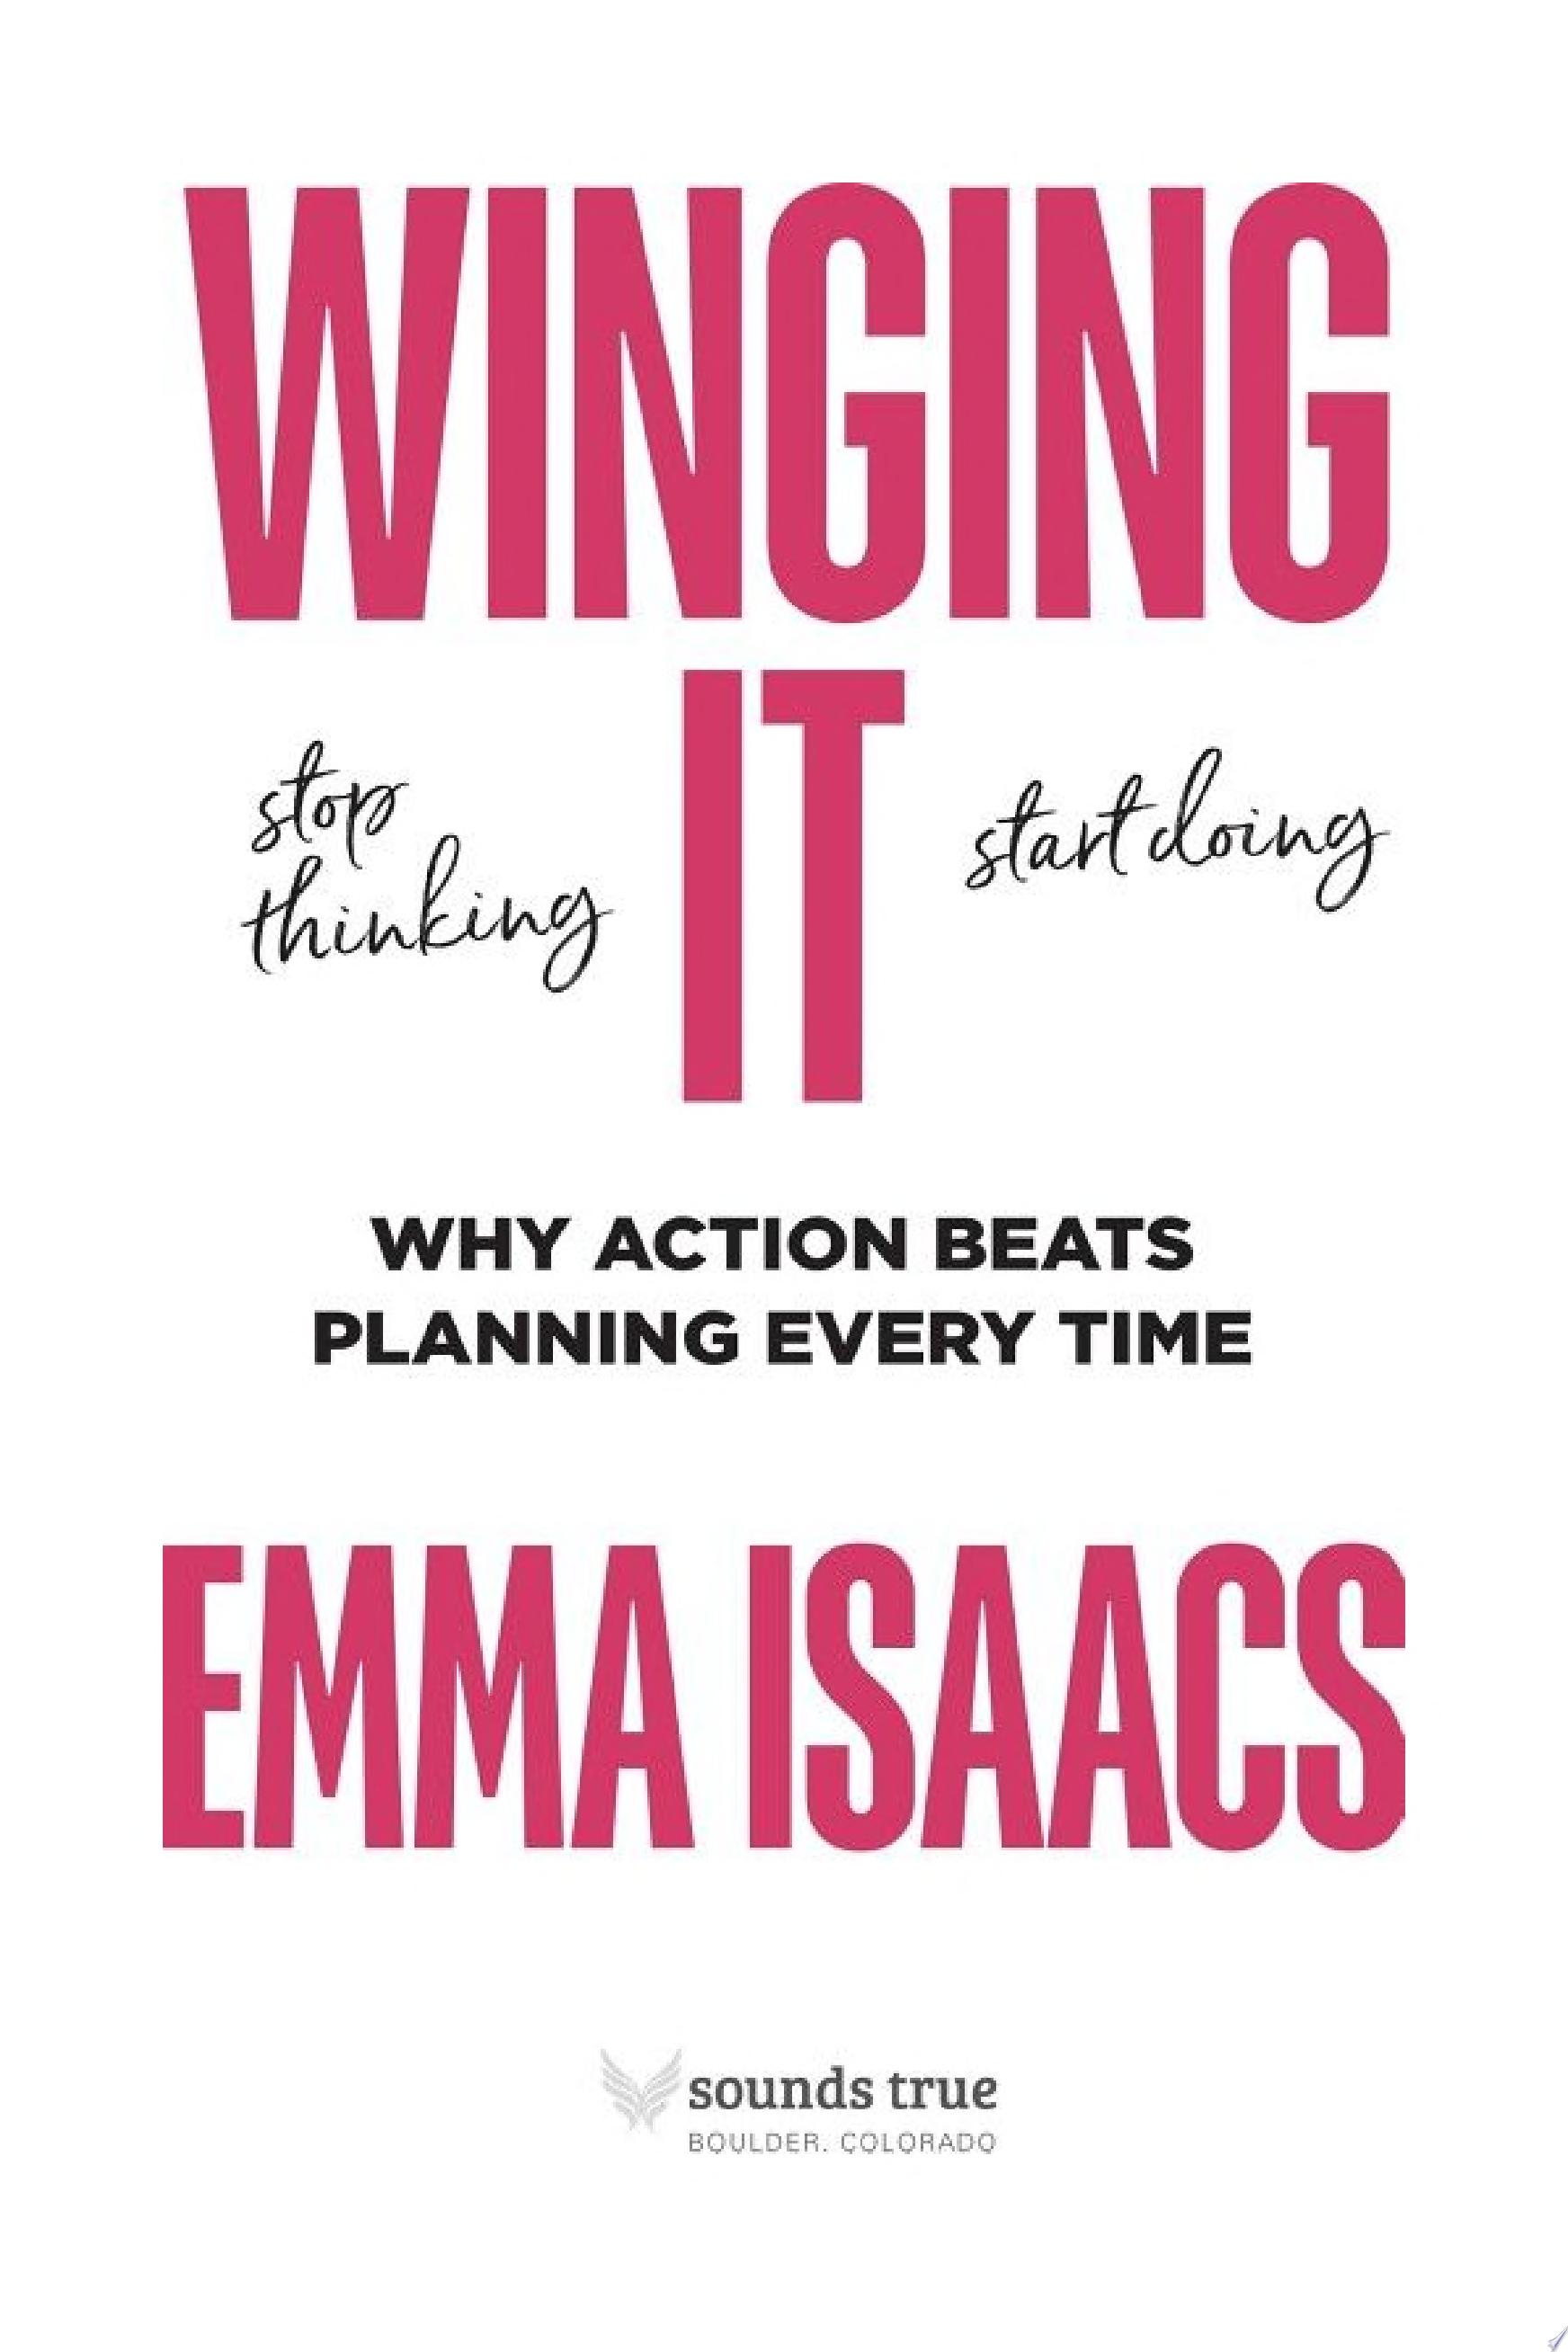 Image for "Winging It: Stop Thinking, Start Doing"